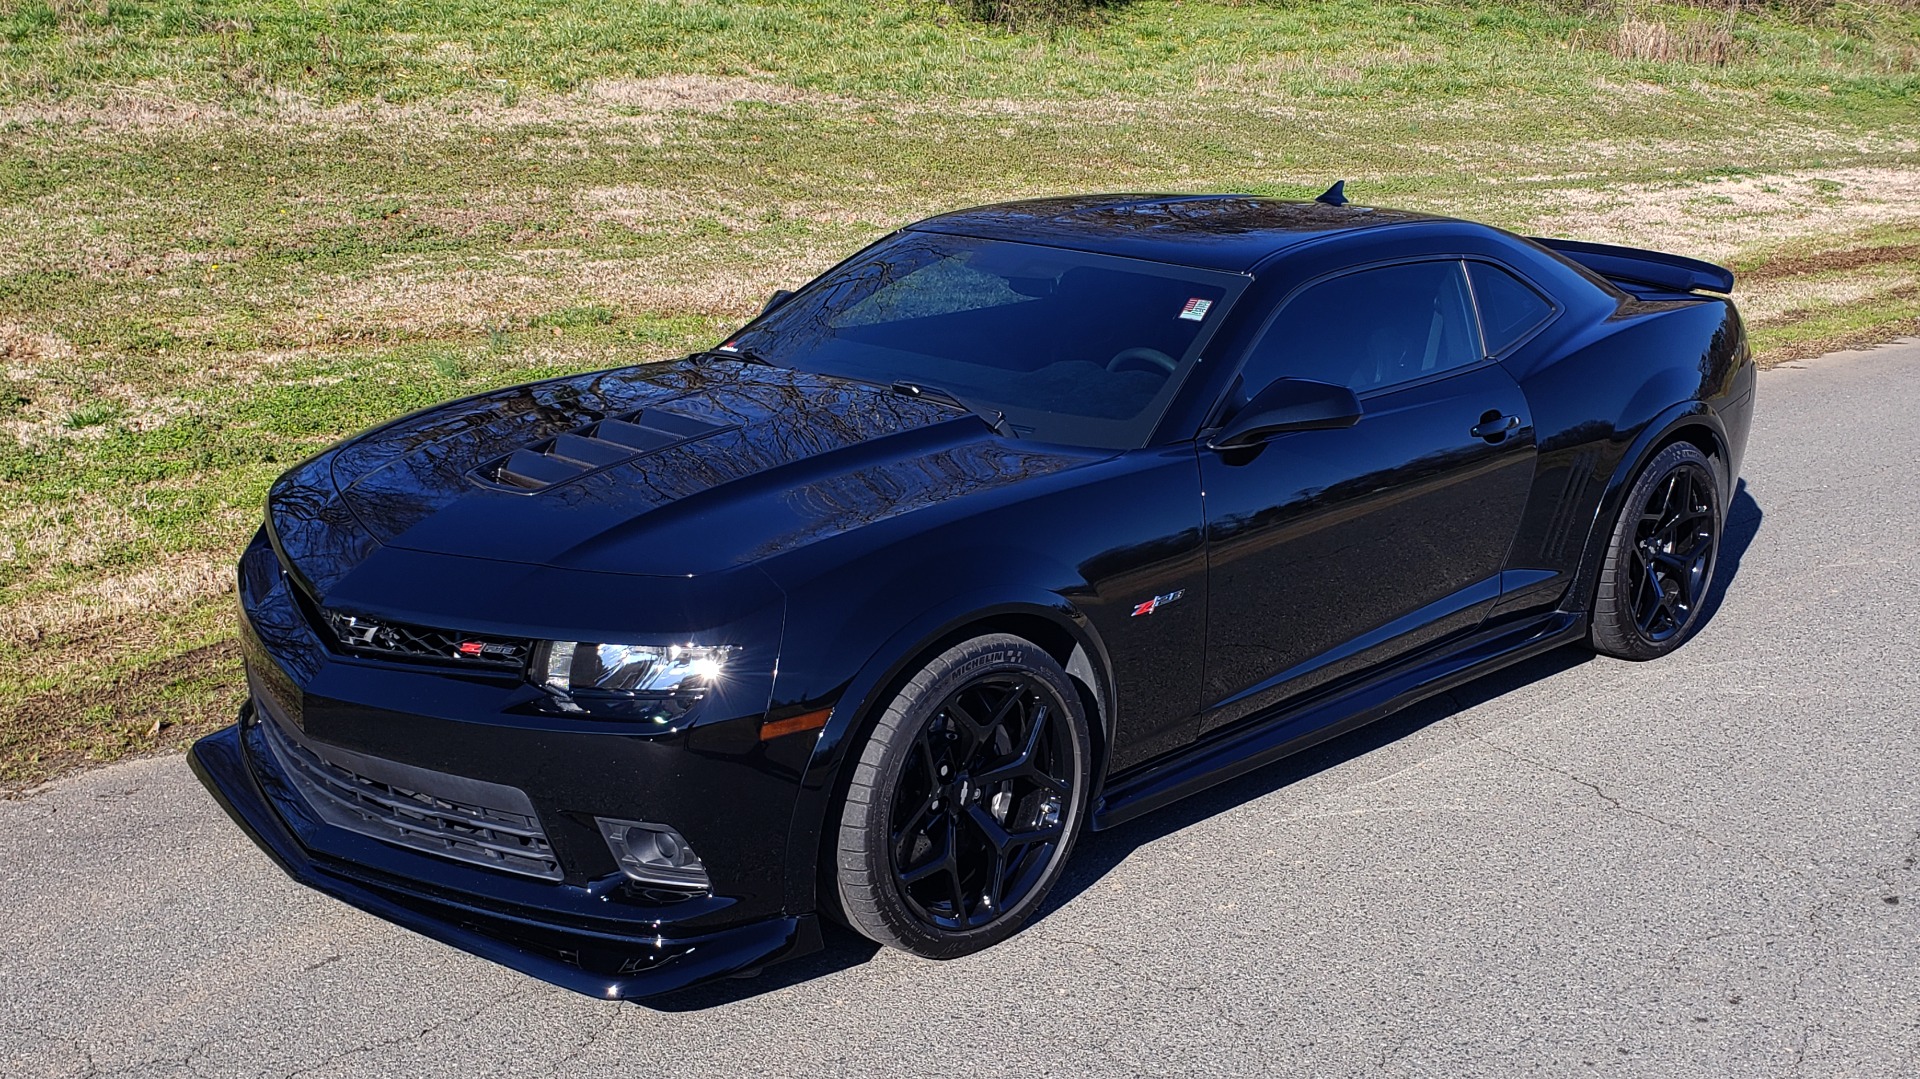 Used 2014 Chevrolet CAMARO Z/28 / 427 7.0L V8 505HP / RADIO / AIR CONDITIONING for sale Sold at Formula Imports in Charlotte NC 28227 17